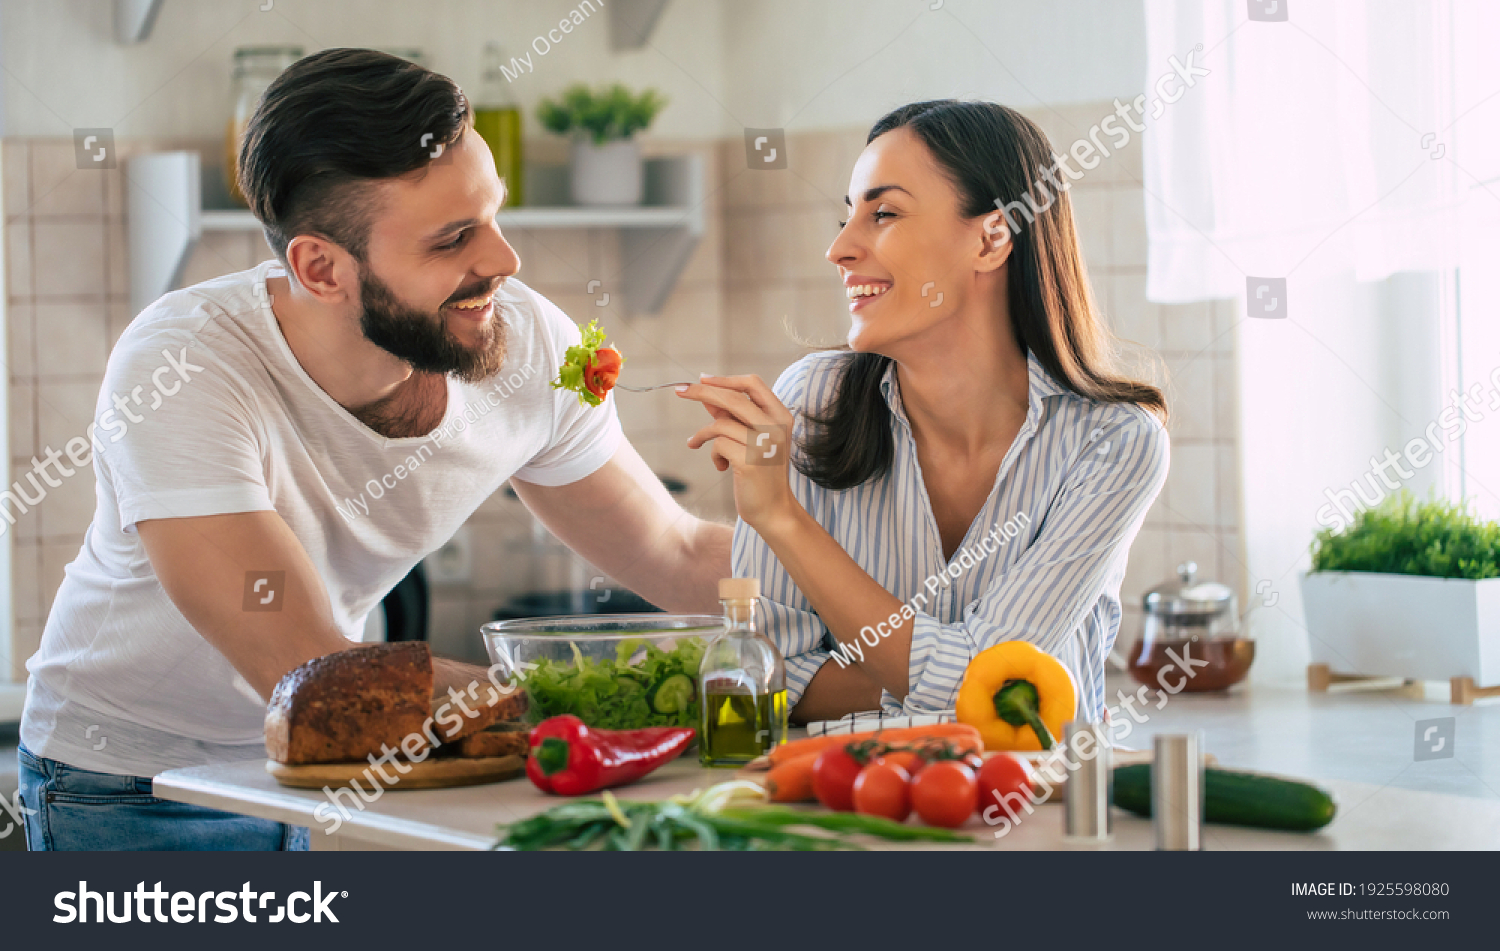 Excited smiling young couple in love making a super healthy vegan salad with many vegetables in the kitchen and man testing it from a girl's hands #1925598080